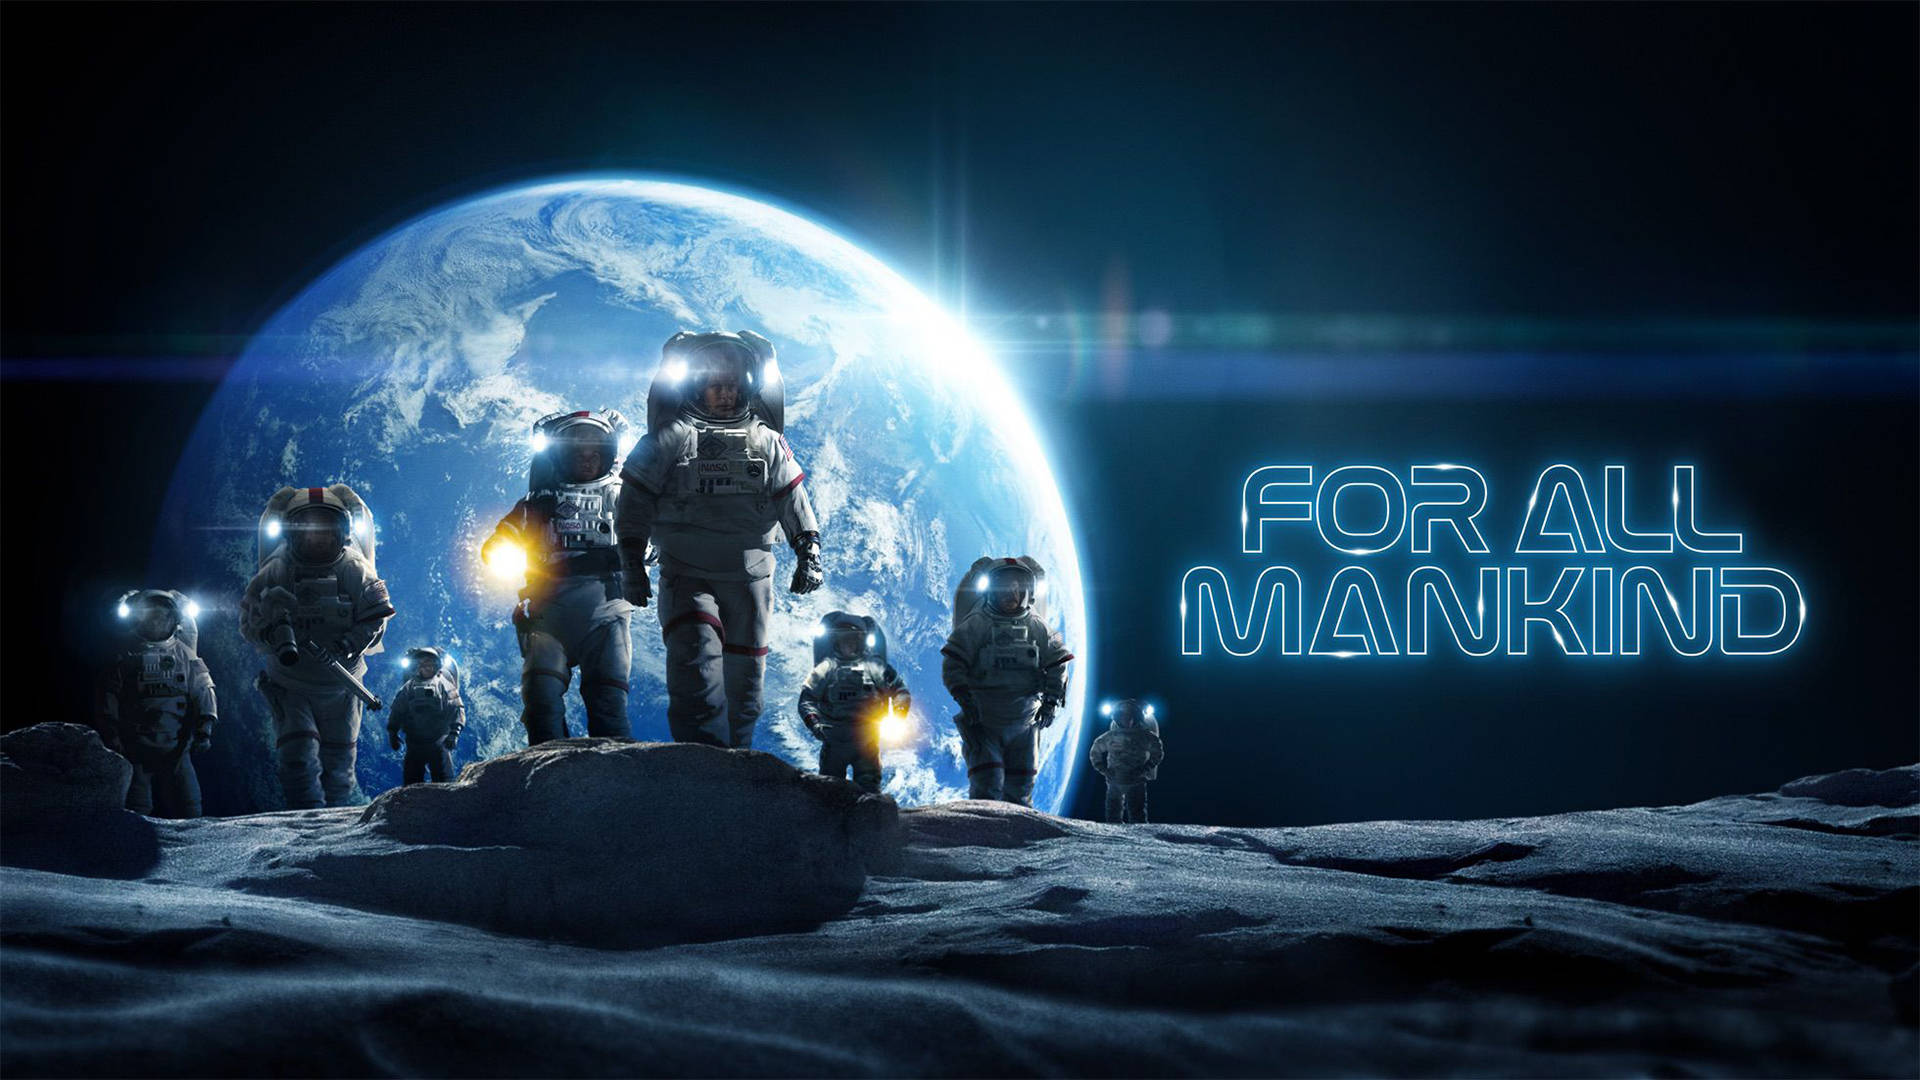 For All Mankind Arriving On The Moon Background